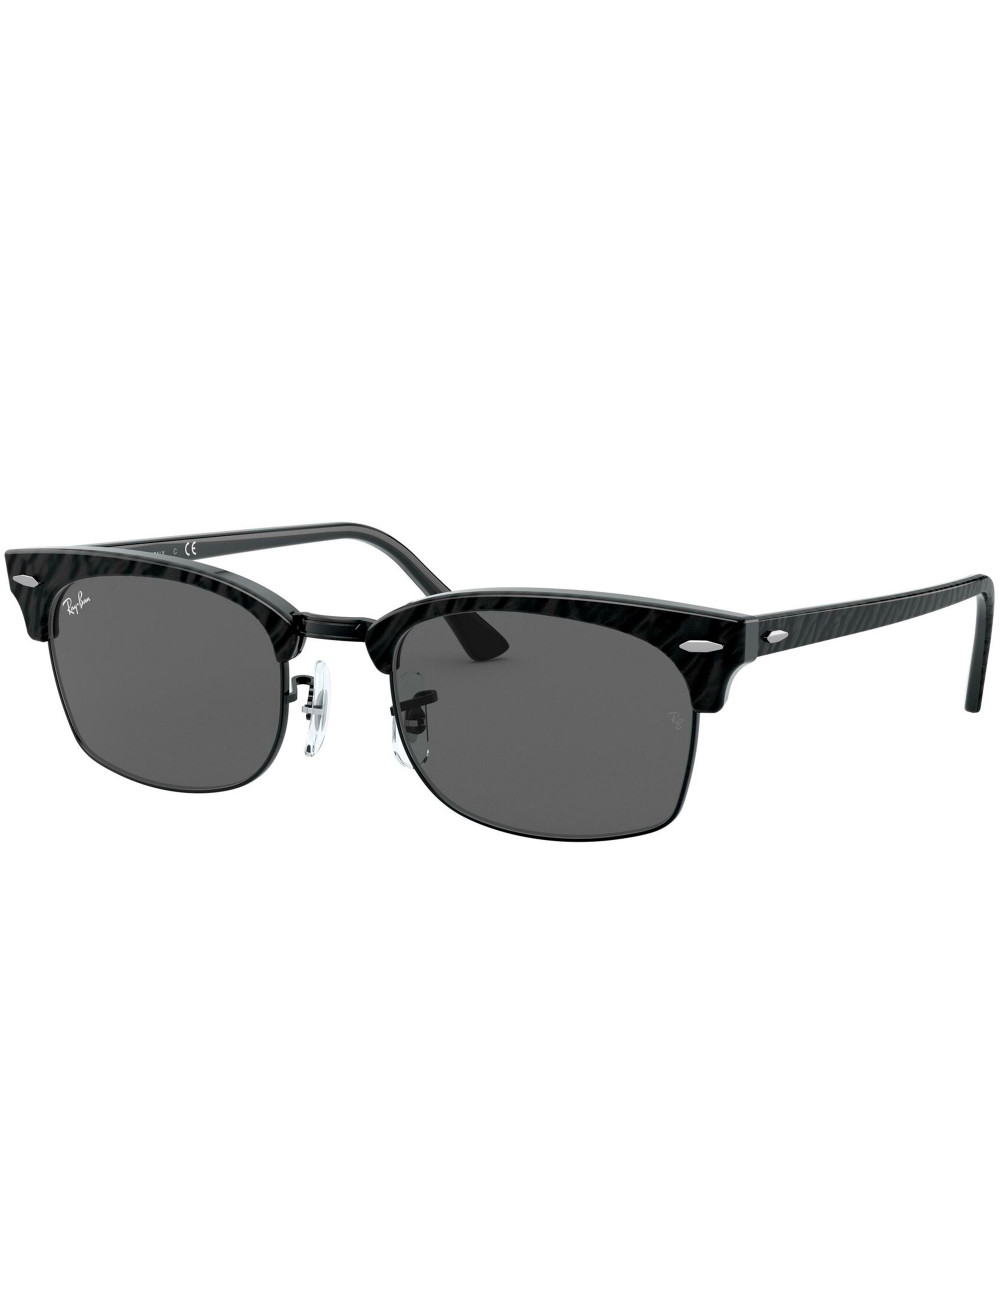 Ray Ban RB2187 1305/B1 Clubmaster square sunglasses 